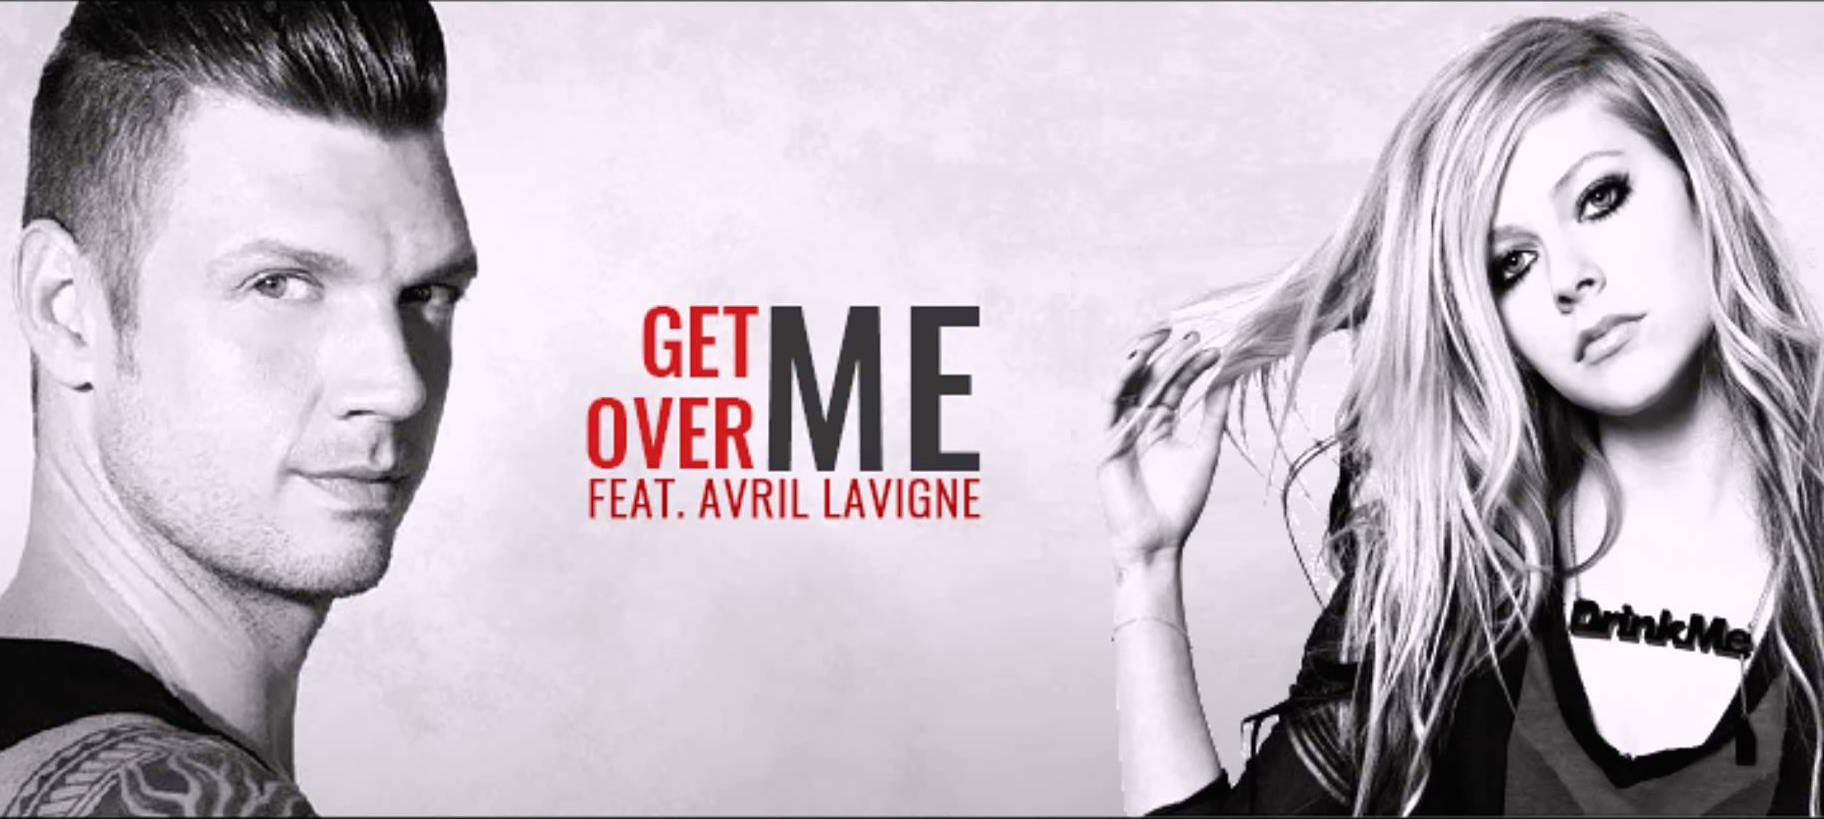 Nick Carter and Avril Lavigne have teamed up for one awful song